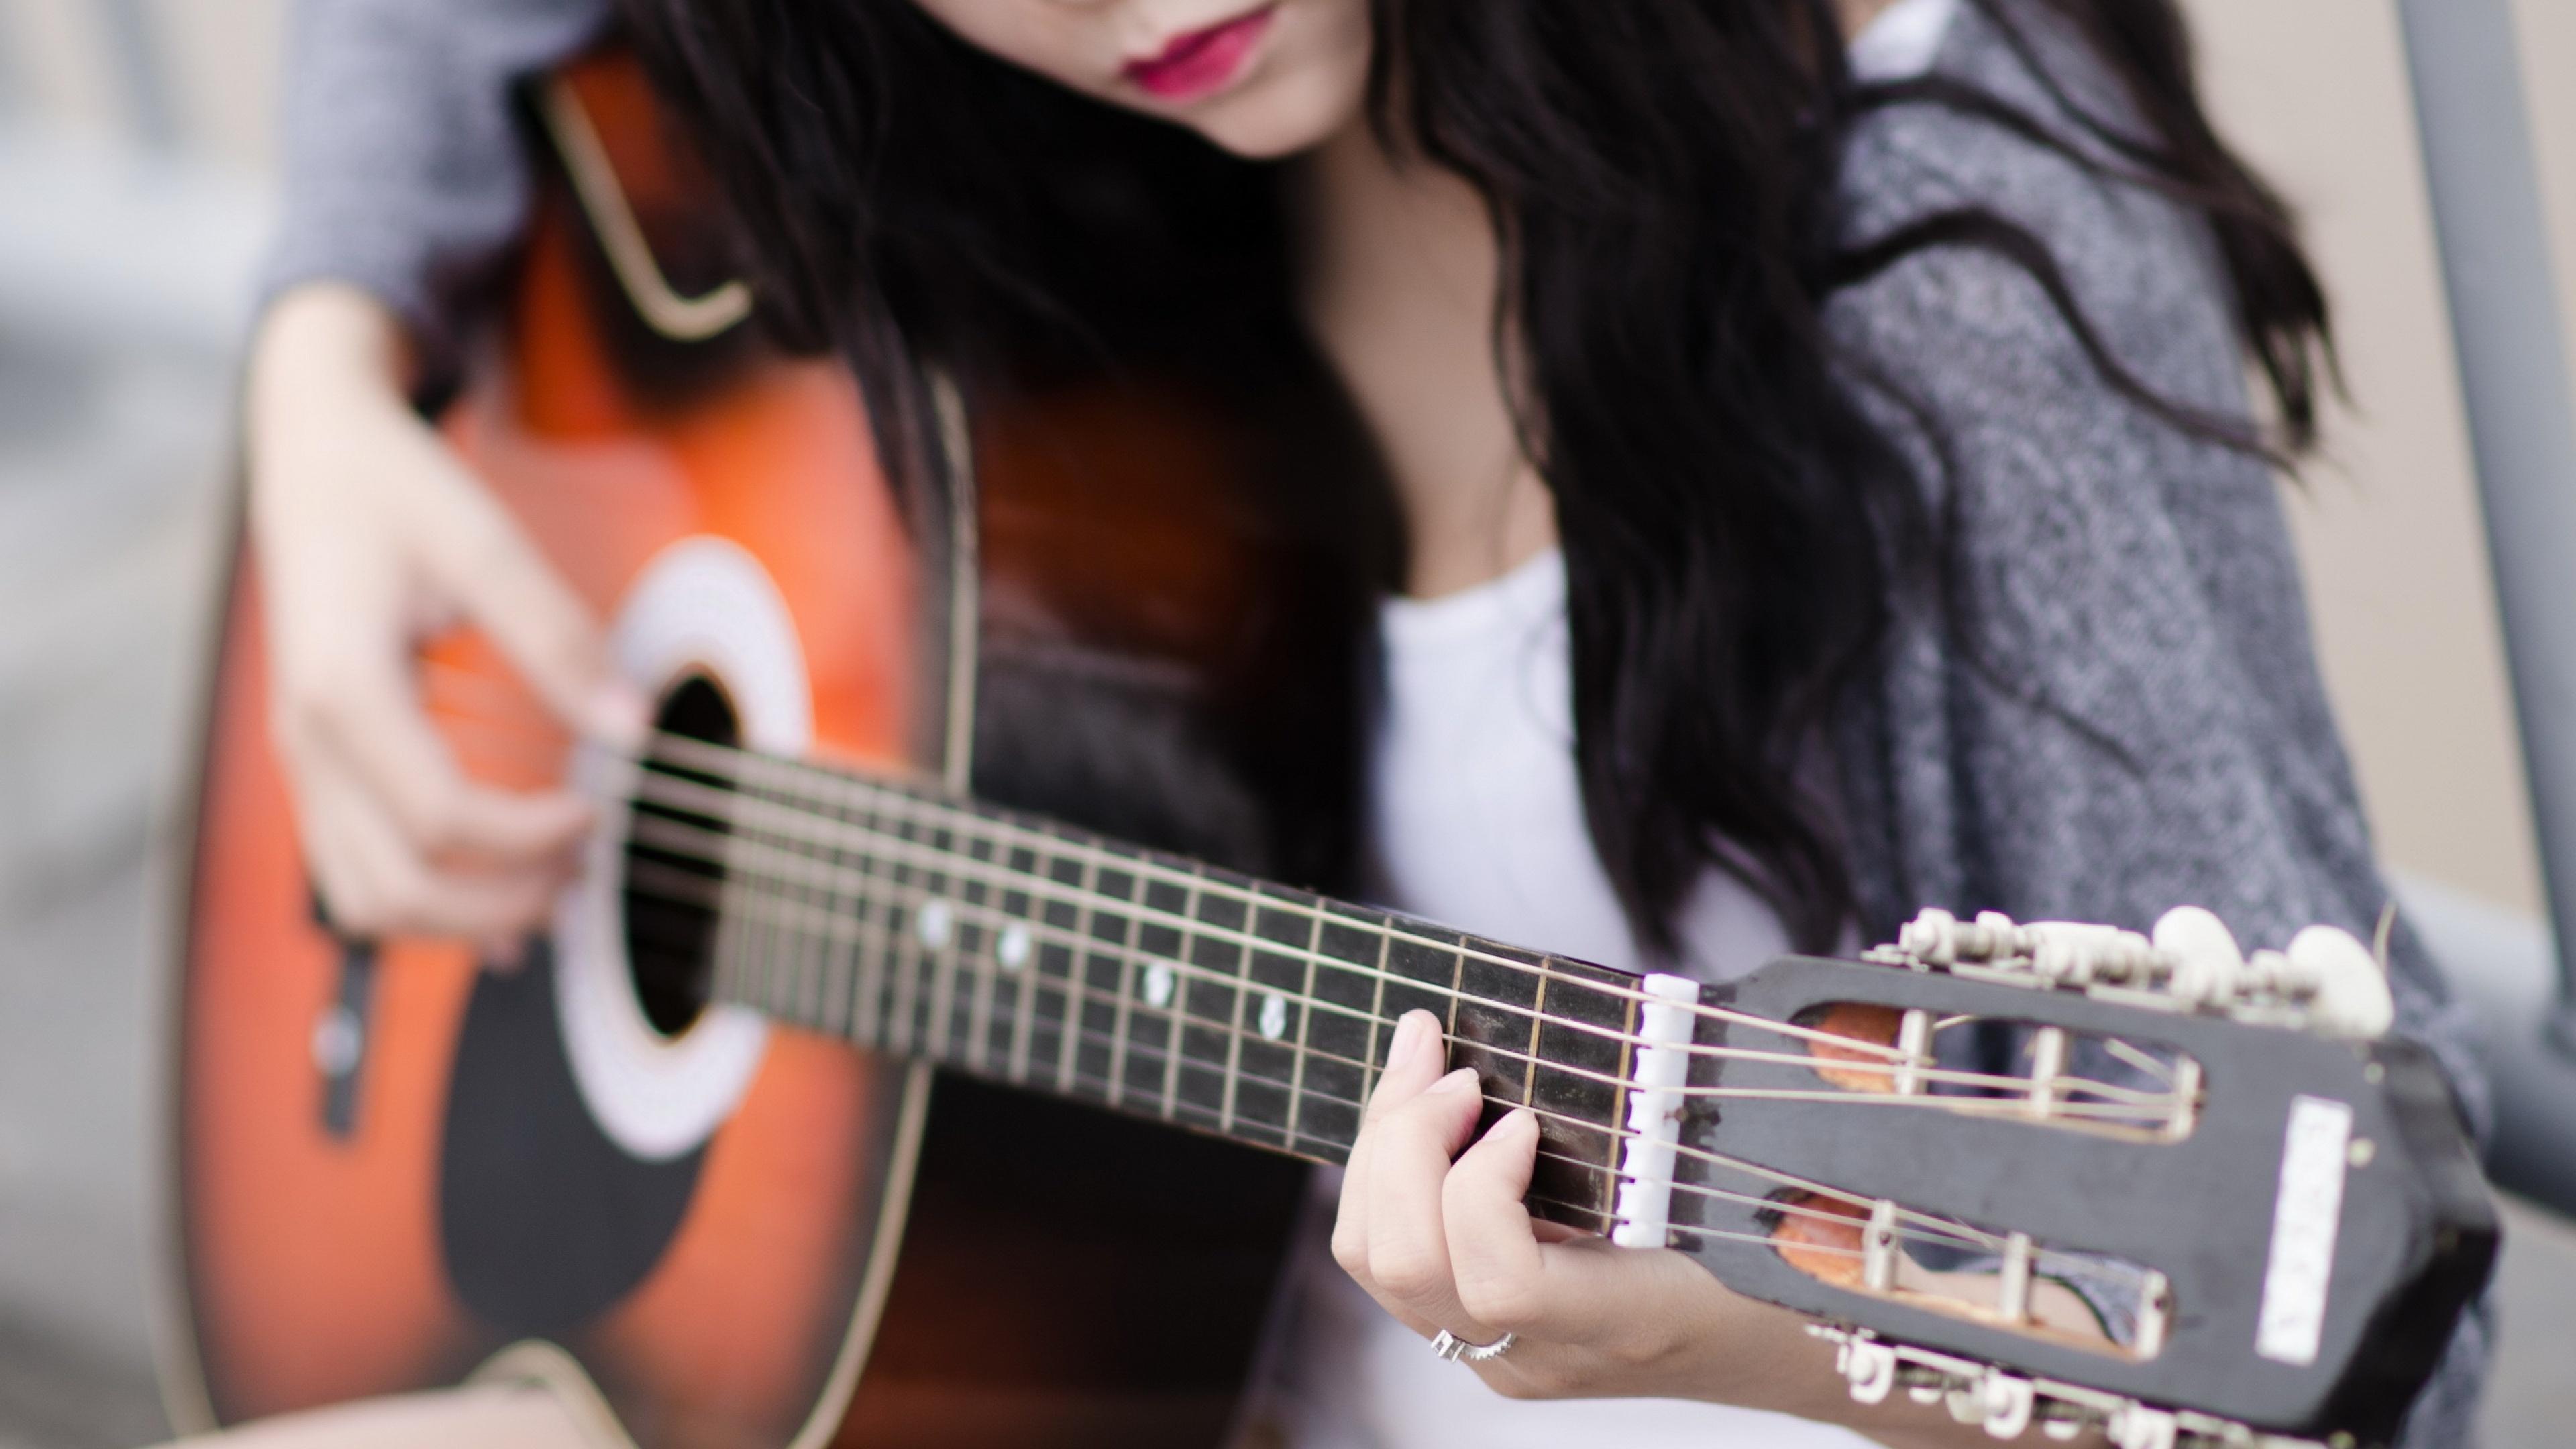 Guitar: Fitting, Girl playing guitar, A fretted musical instrument that typically has six strings. 3840x2160 4K Wallpaper.